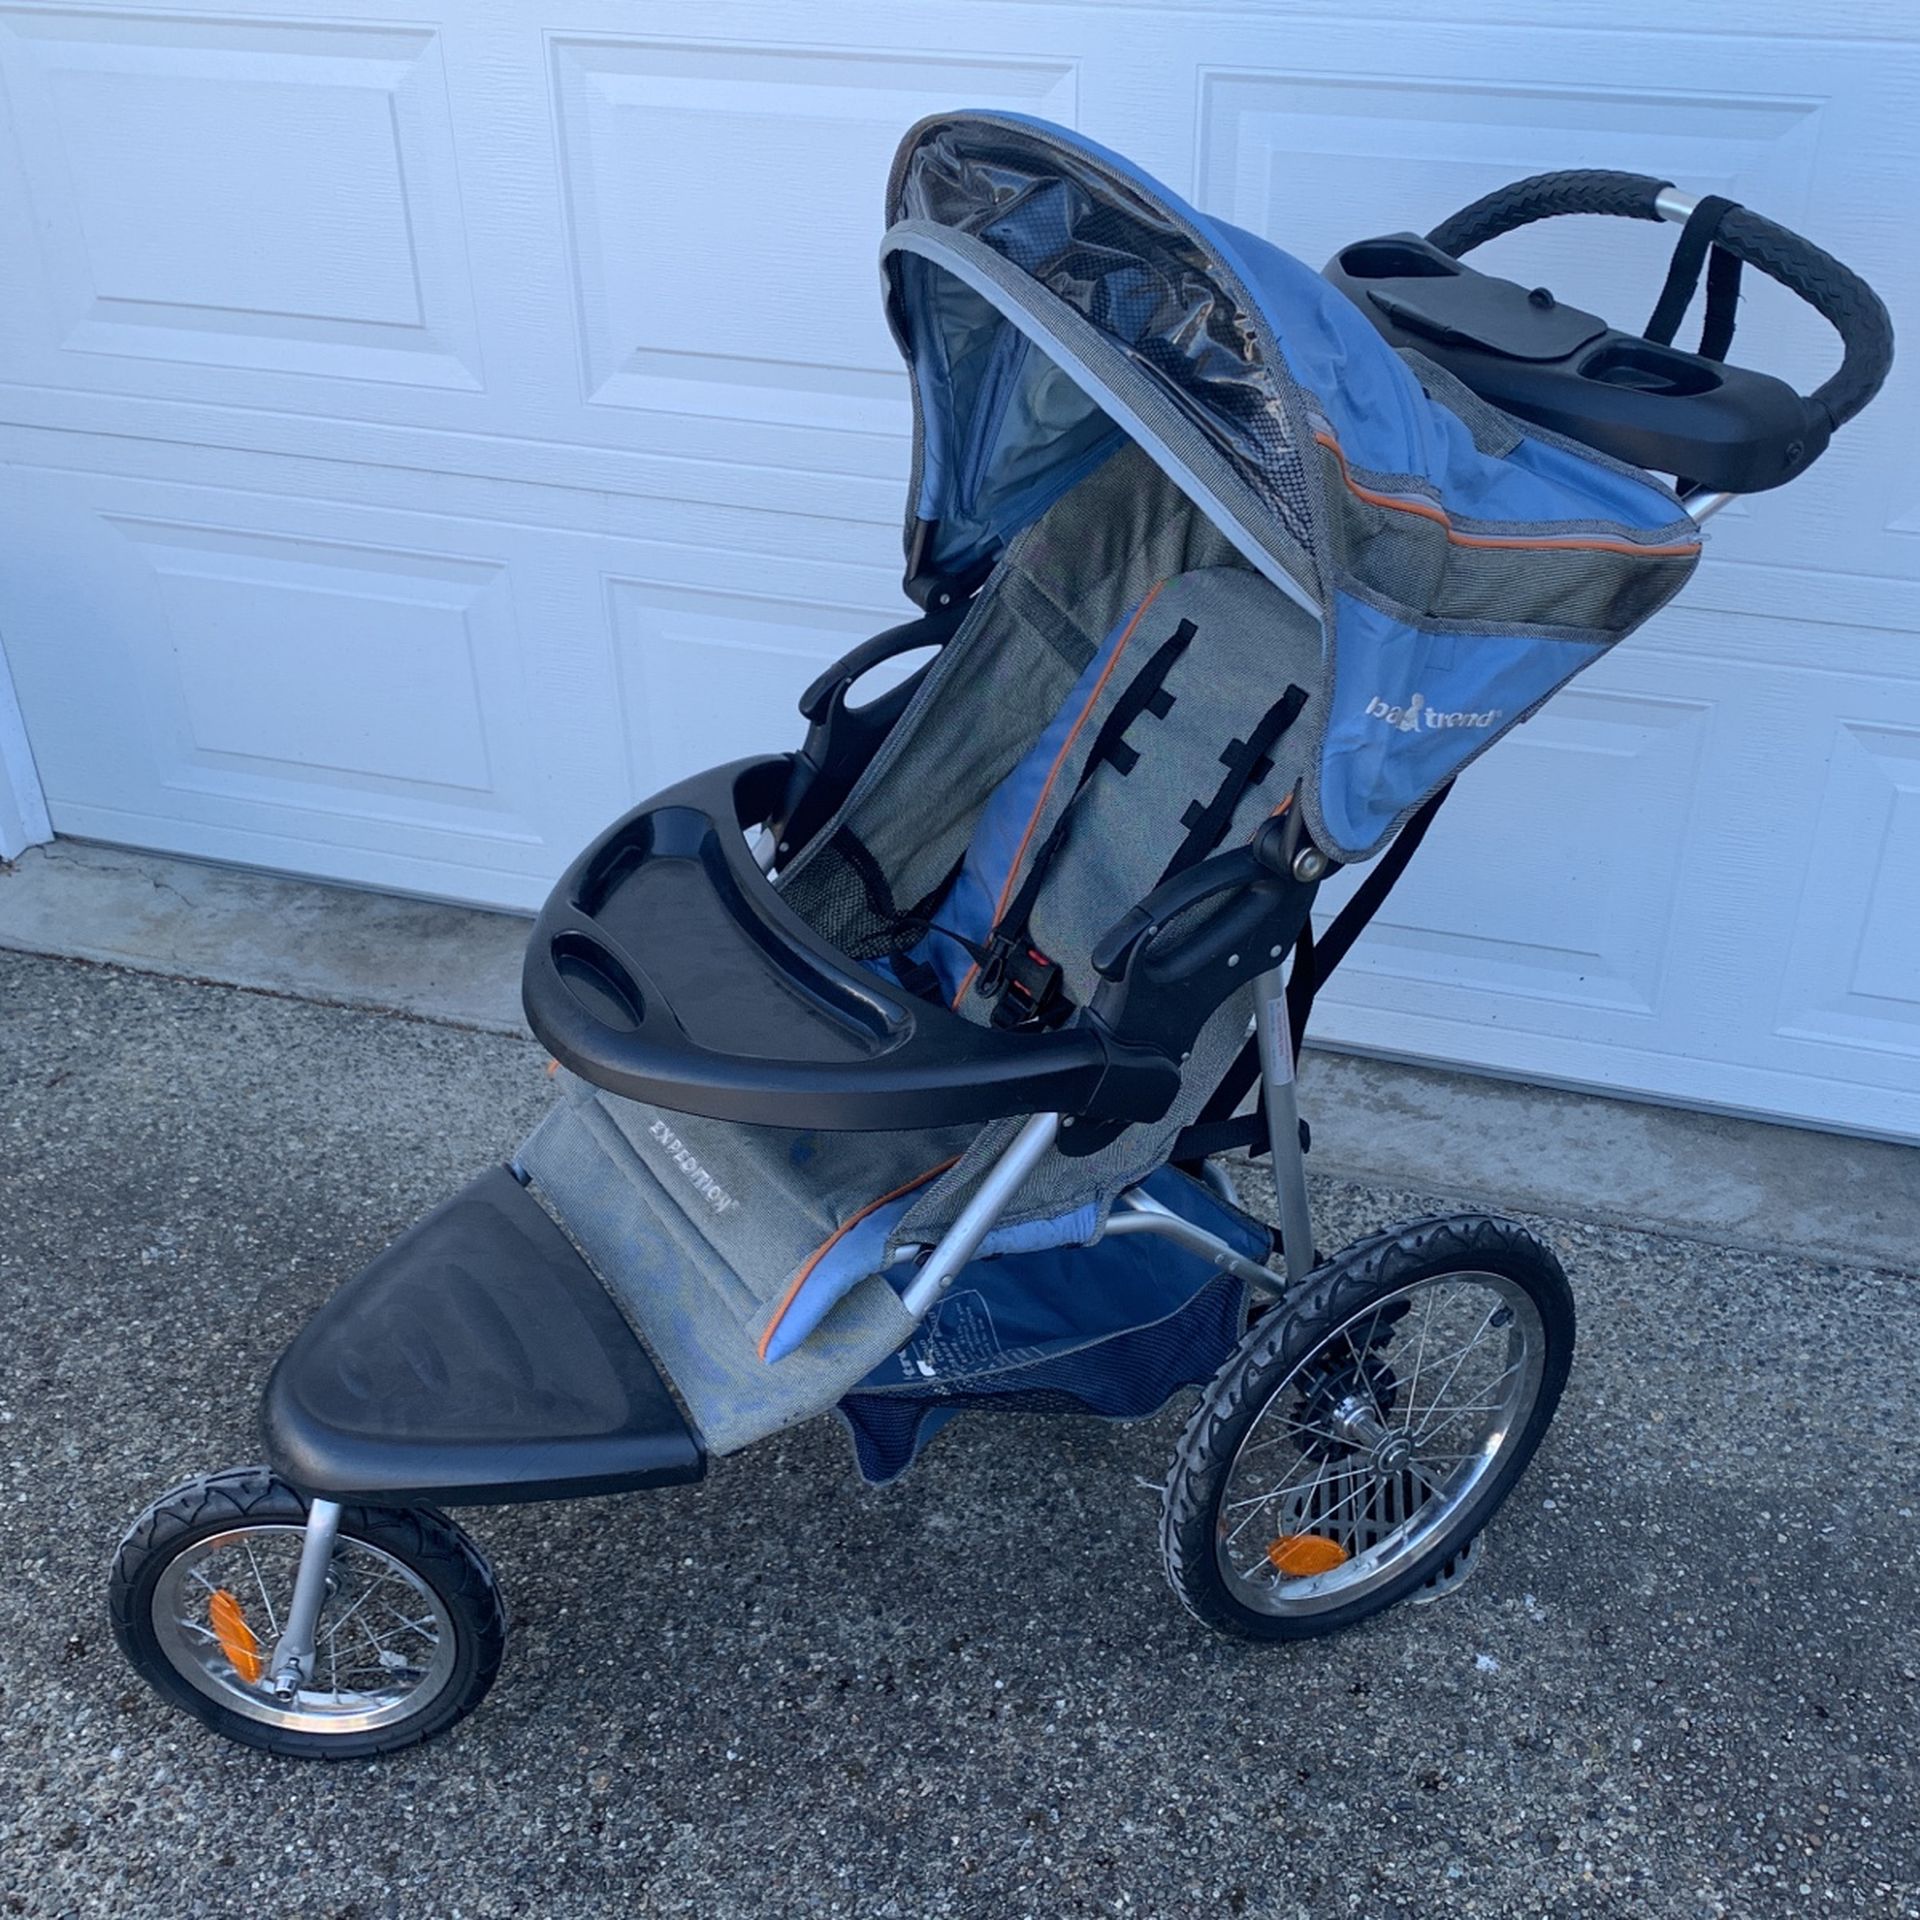 Expedition, Baby Trend Baby Stroller